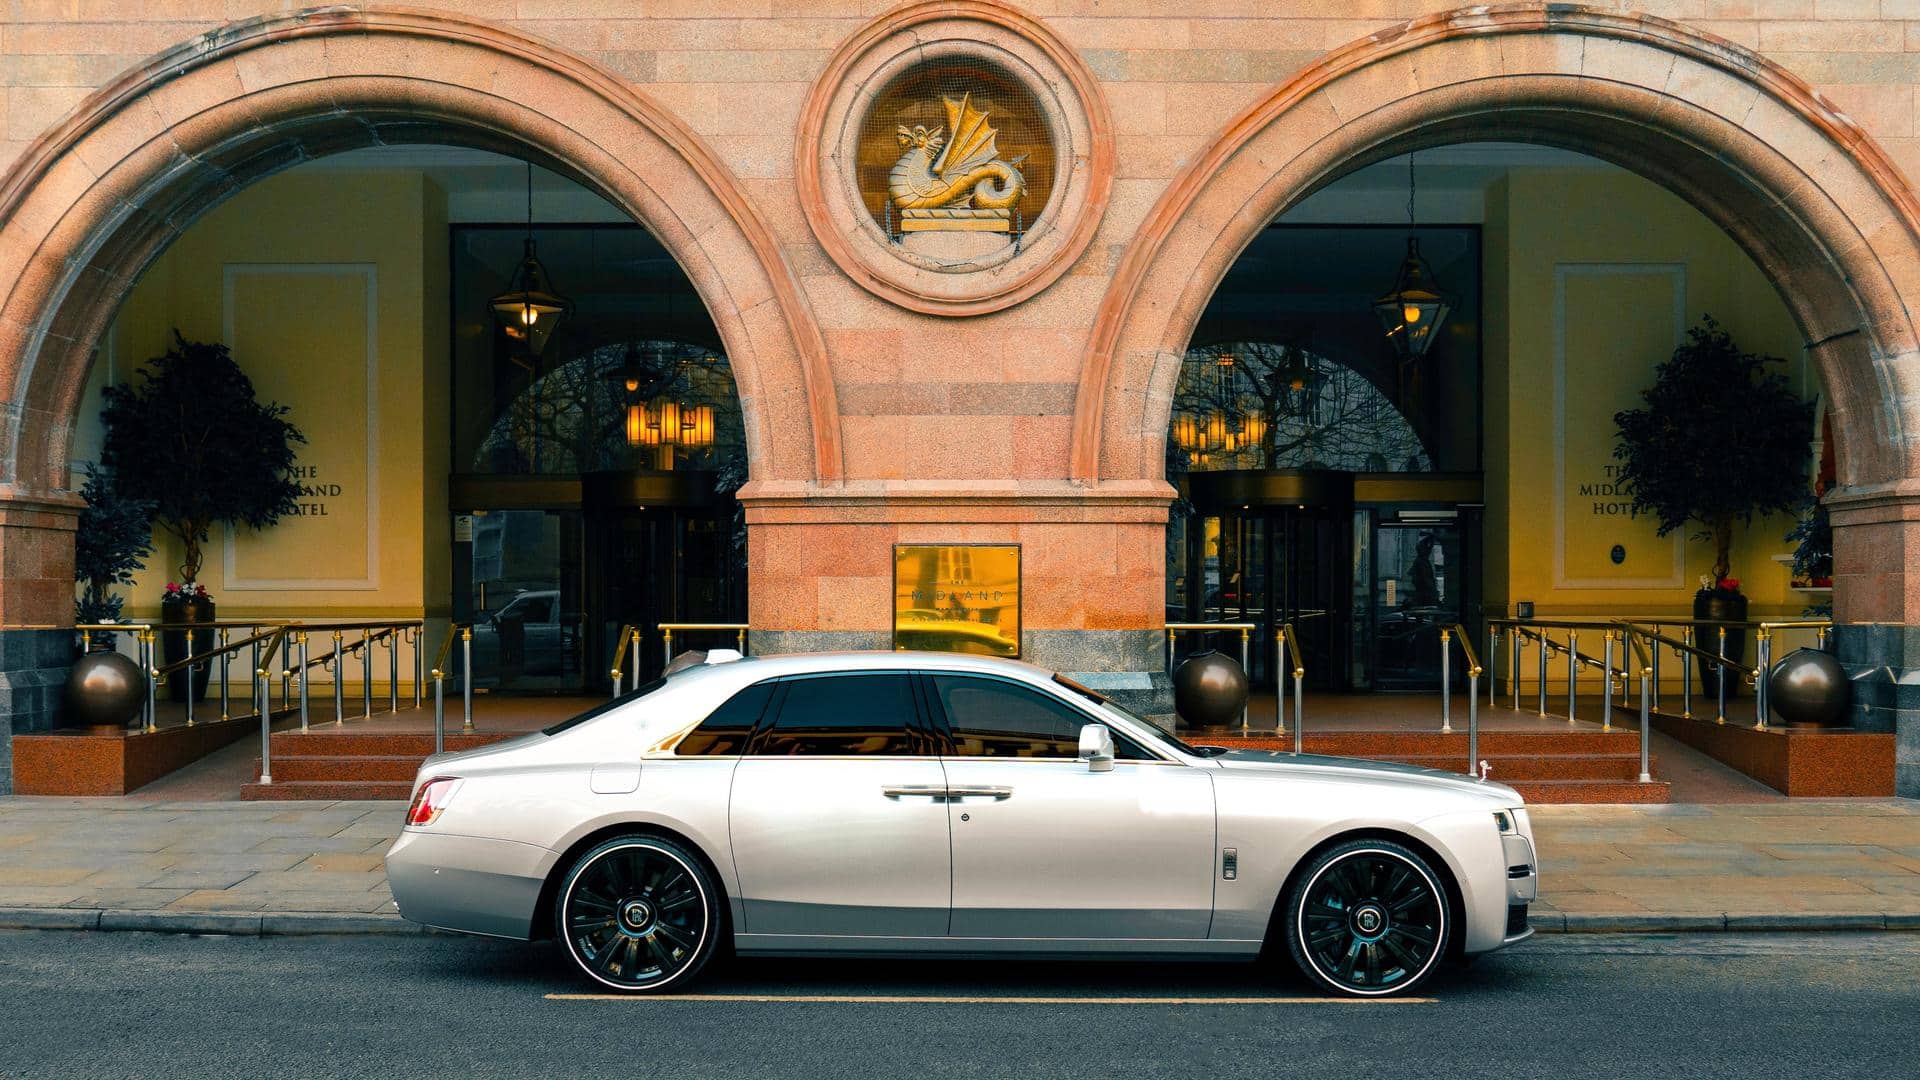 Top features which make the one-off Rolls-Royce Manchester Ghost special